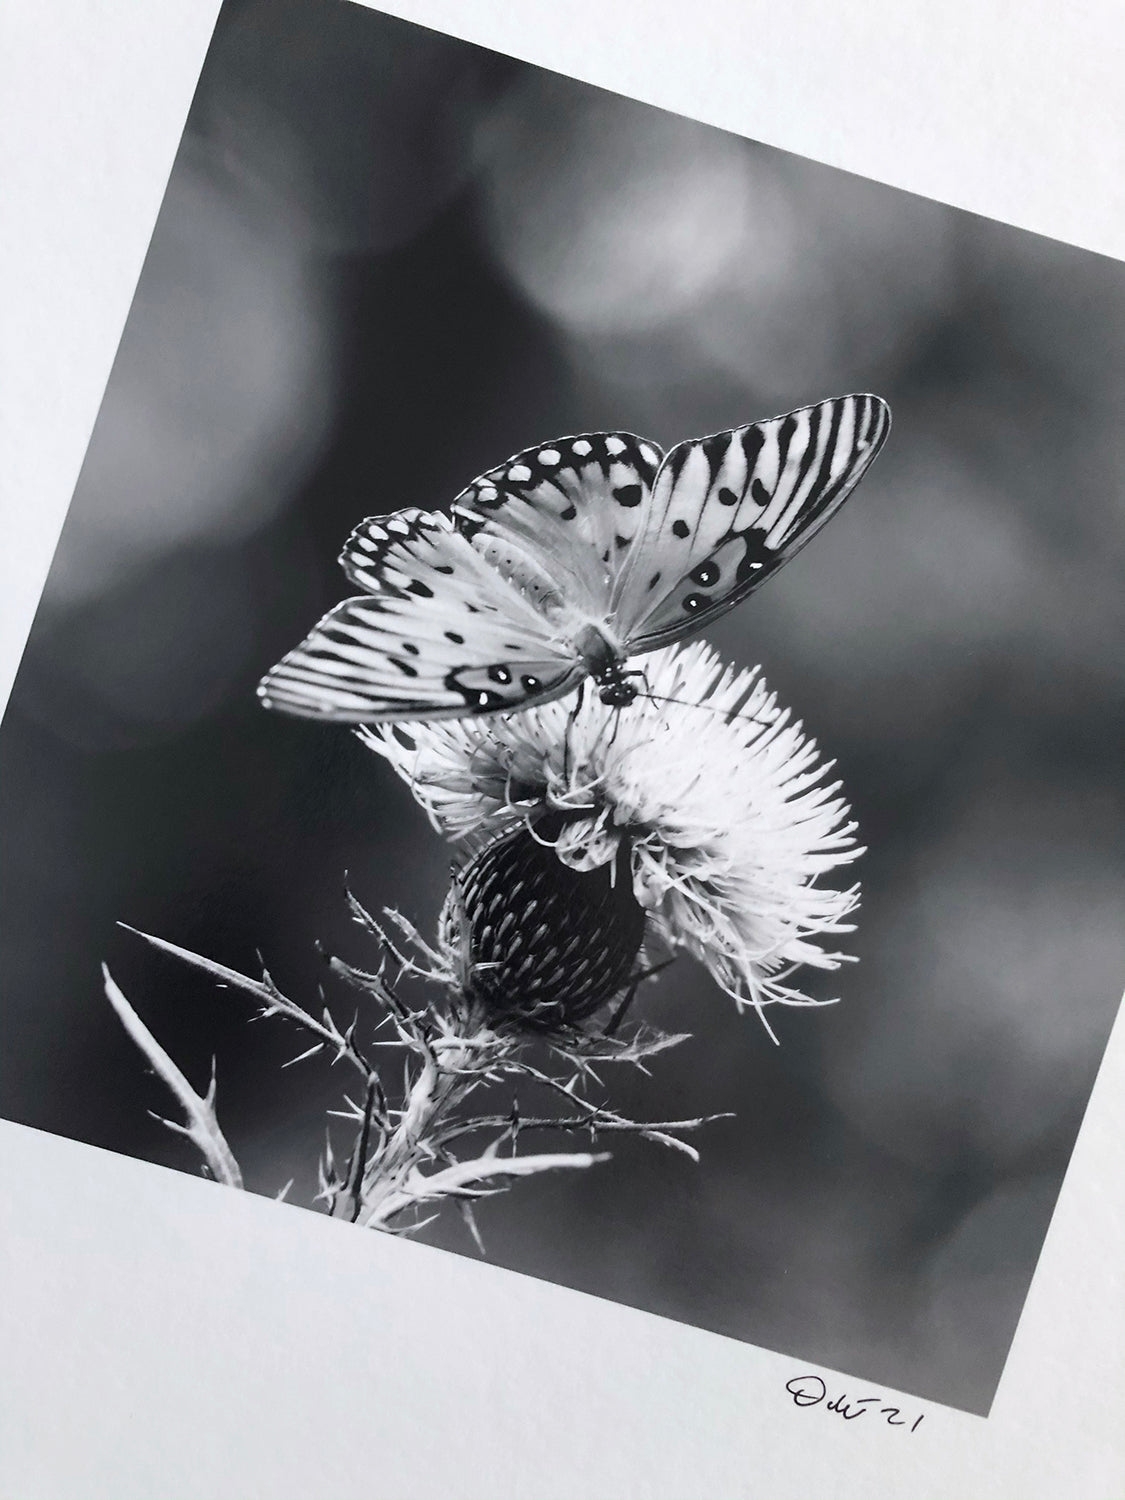 Black and white photograph of a Gulf Fritillary butterfly on a purple thistle. At 8 x 8-inches, this was the smallest print in the project.